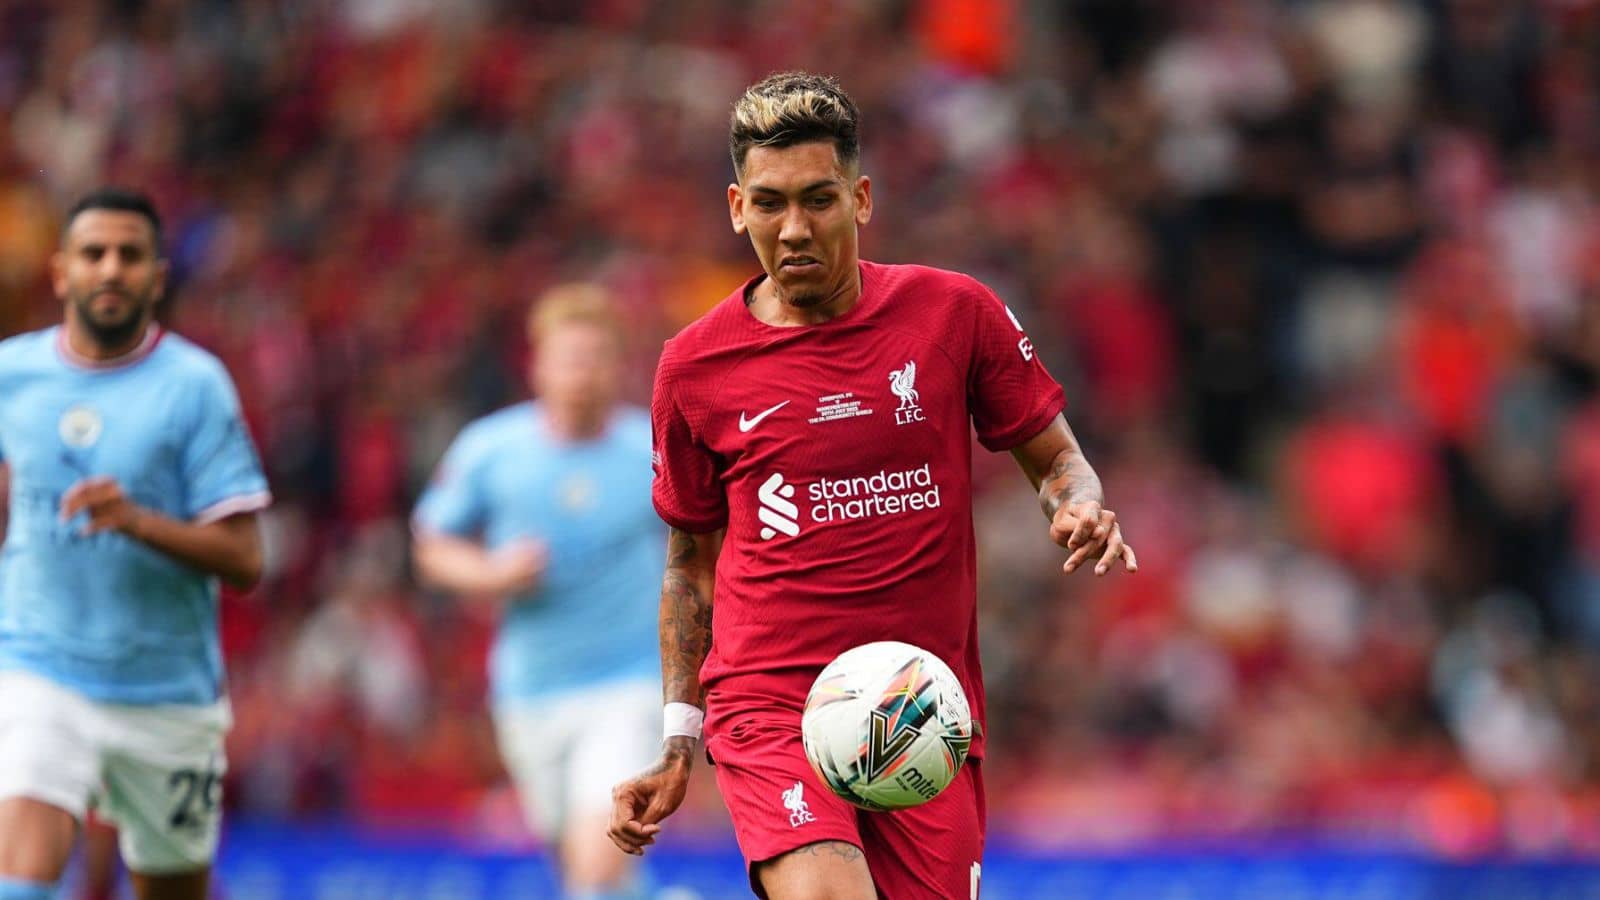 Carragher Hails Firmino’s Decision To Leave Liverpool